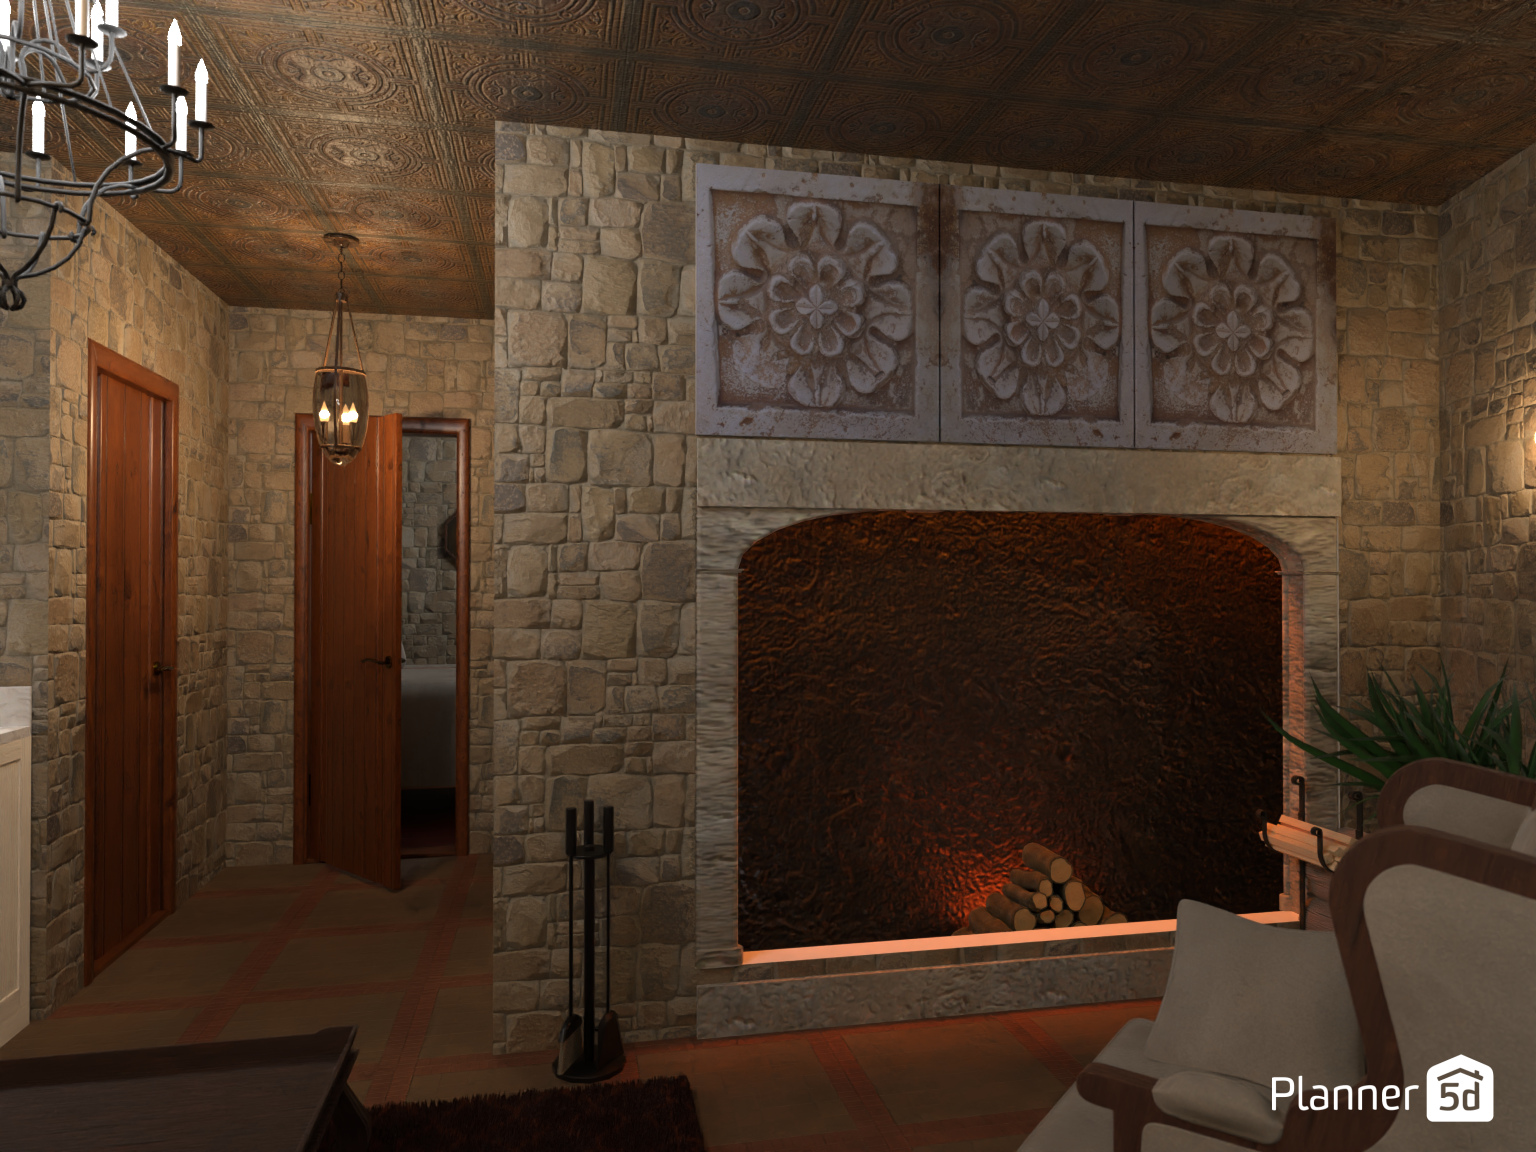 Medieval fireplace 15557575 by Rita image